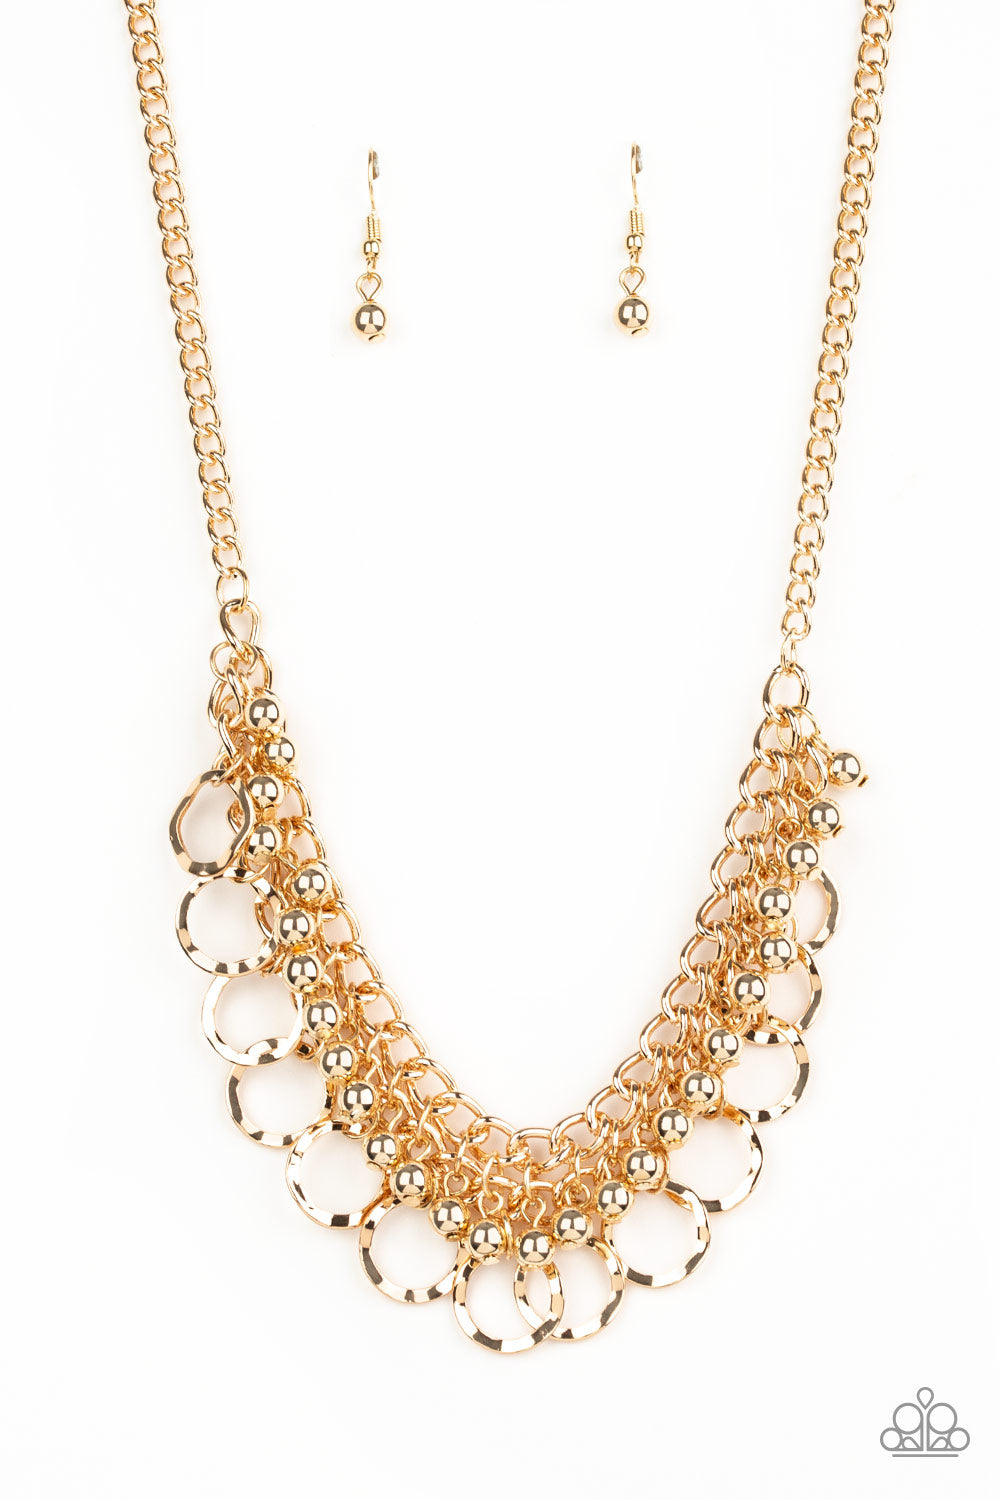 Paparazzi Accessories - Ring Leader Radiance #N615 - Gold Necklace